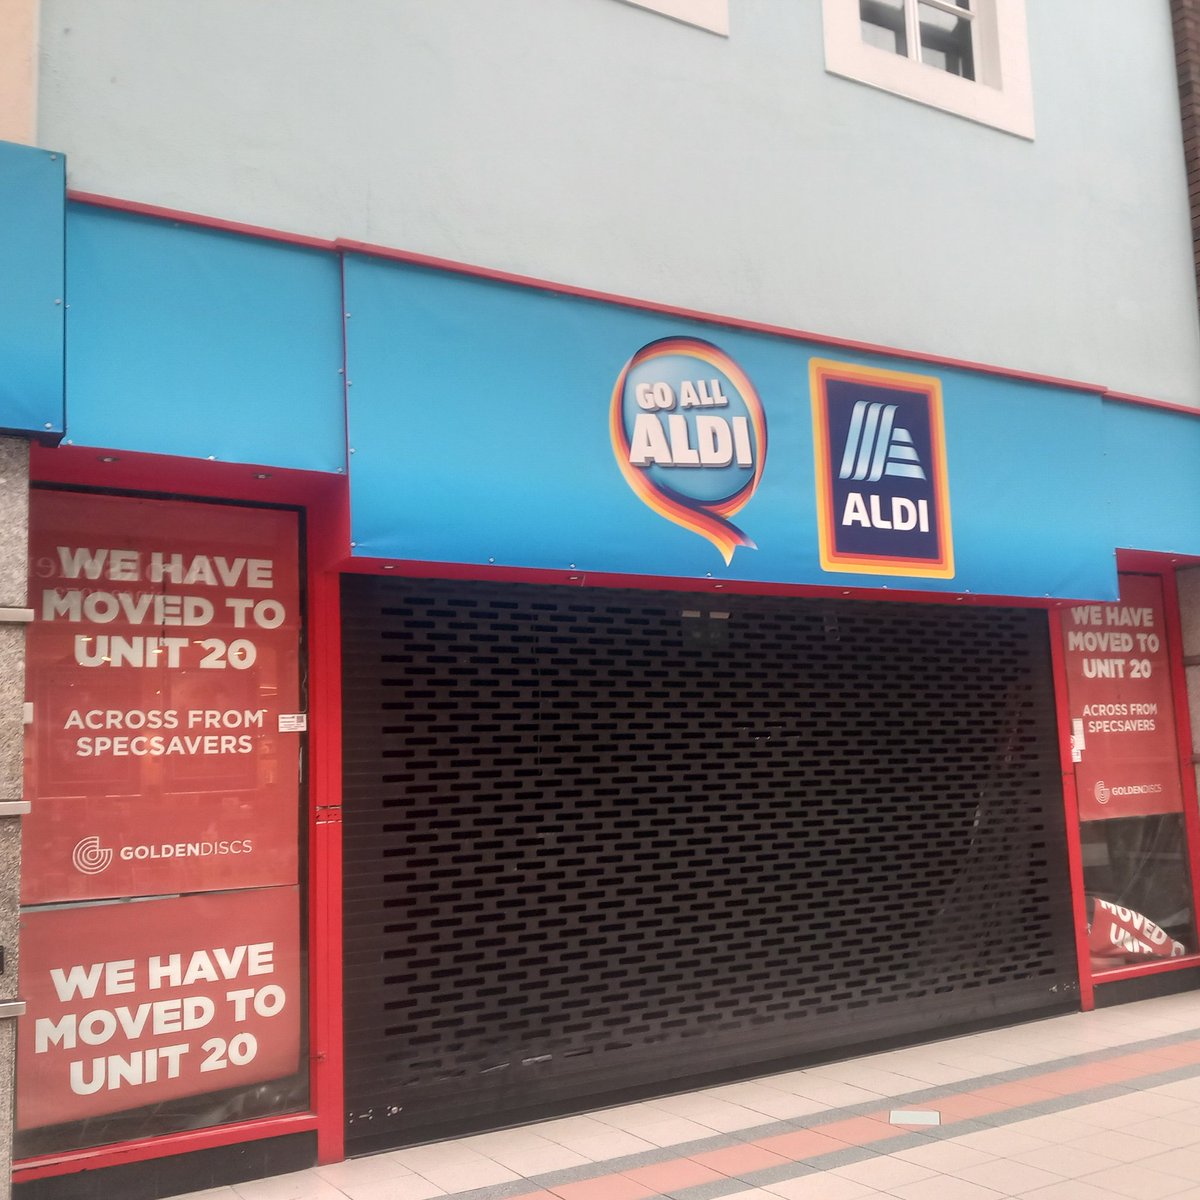 Aldi to open a supermarket at the former Debenhams Department Store at City Square Shopping Centre 🛍 in #WaterfordCity